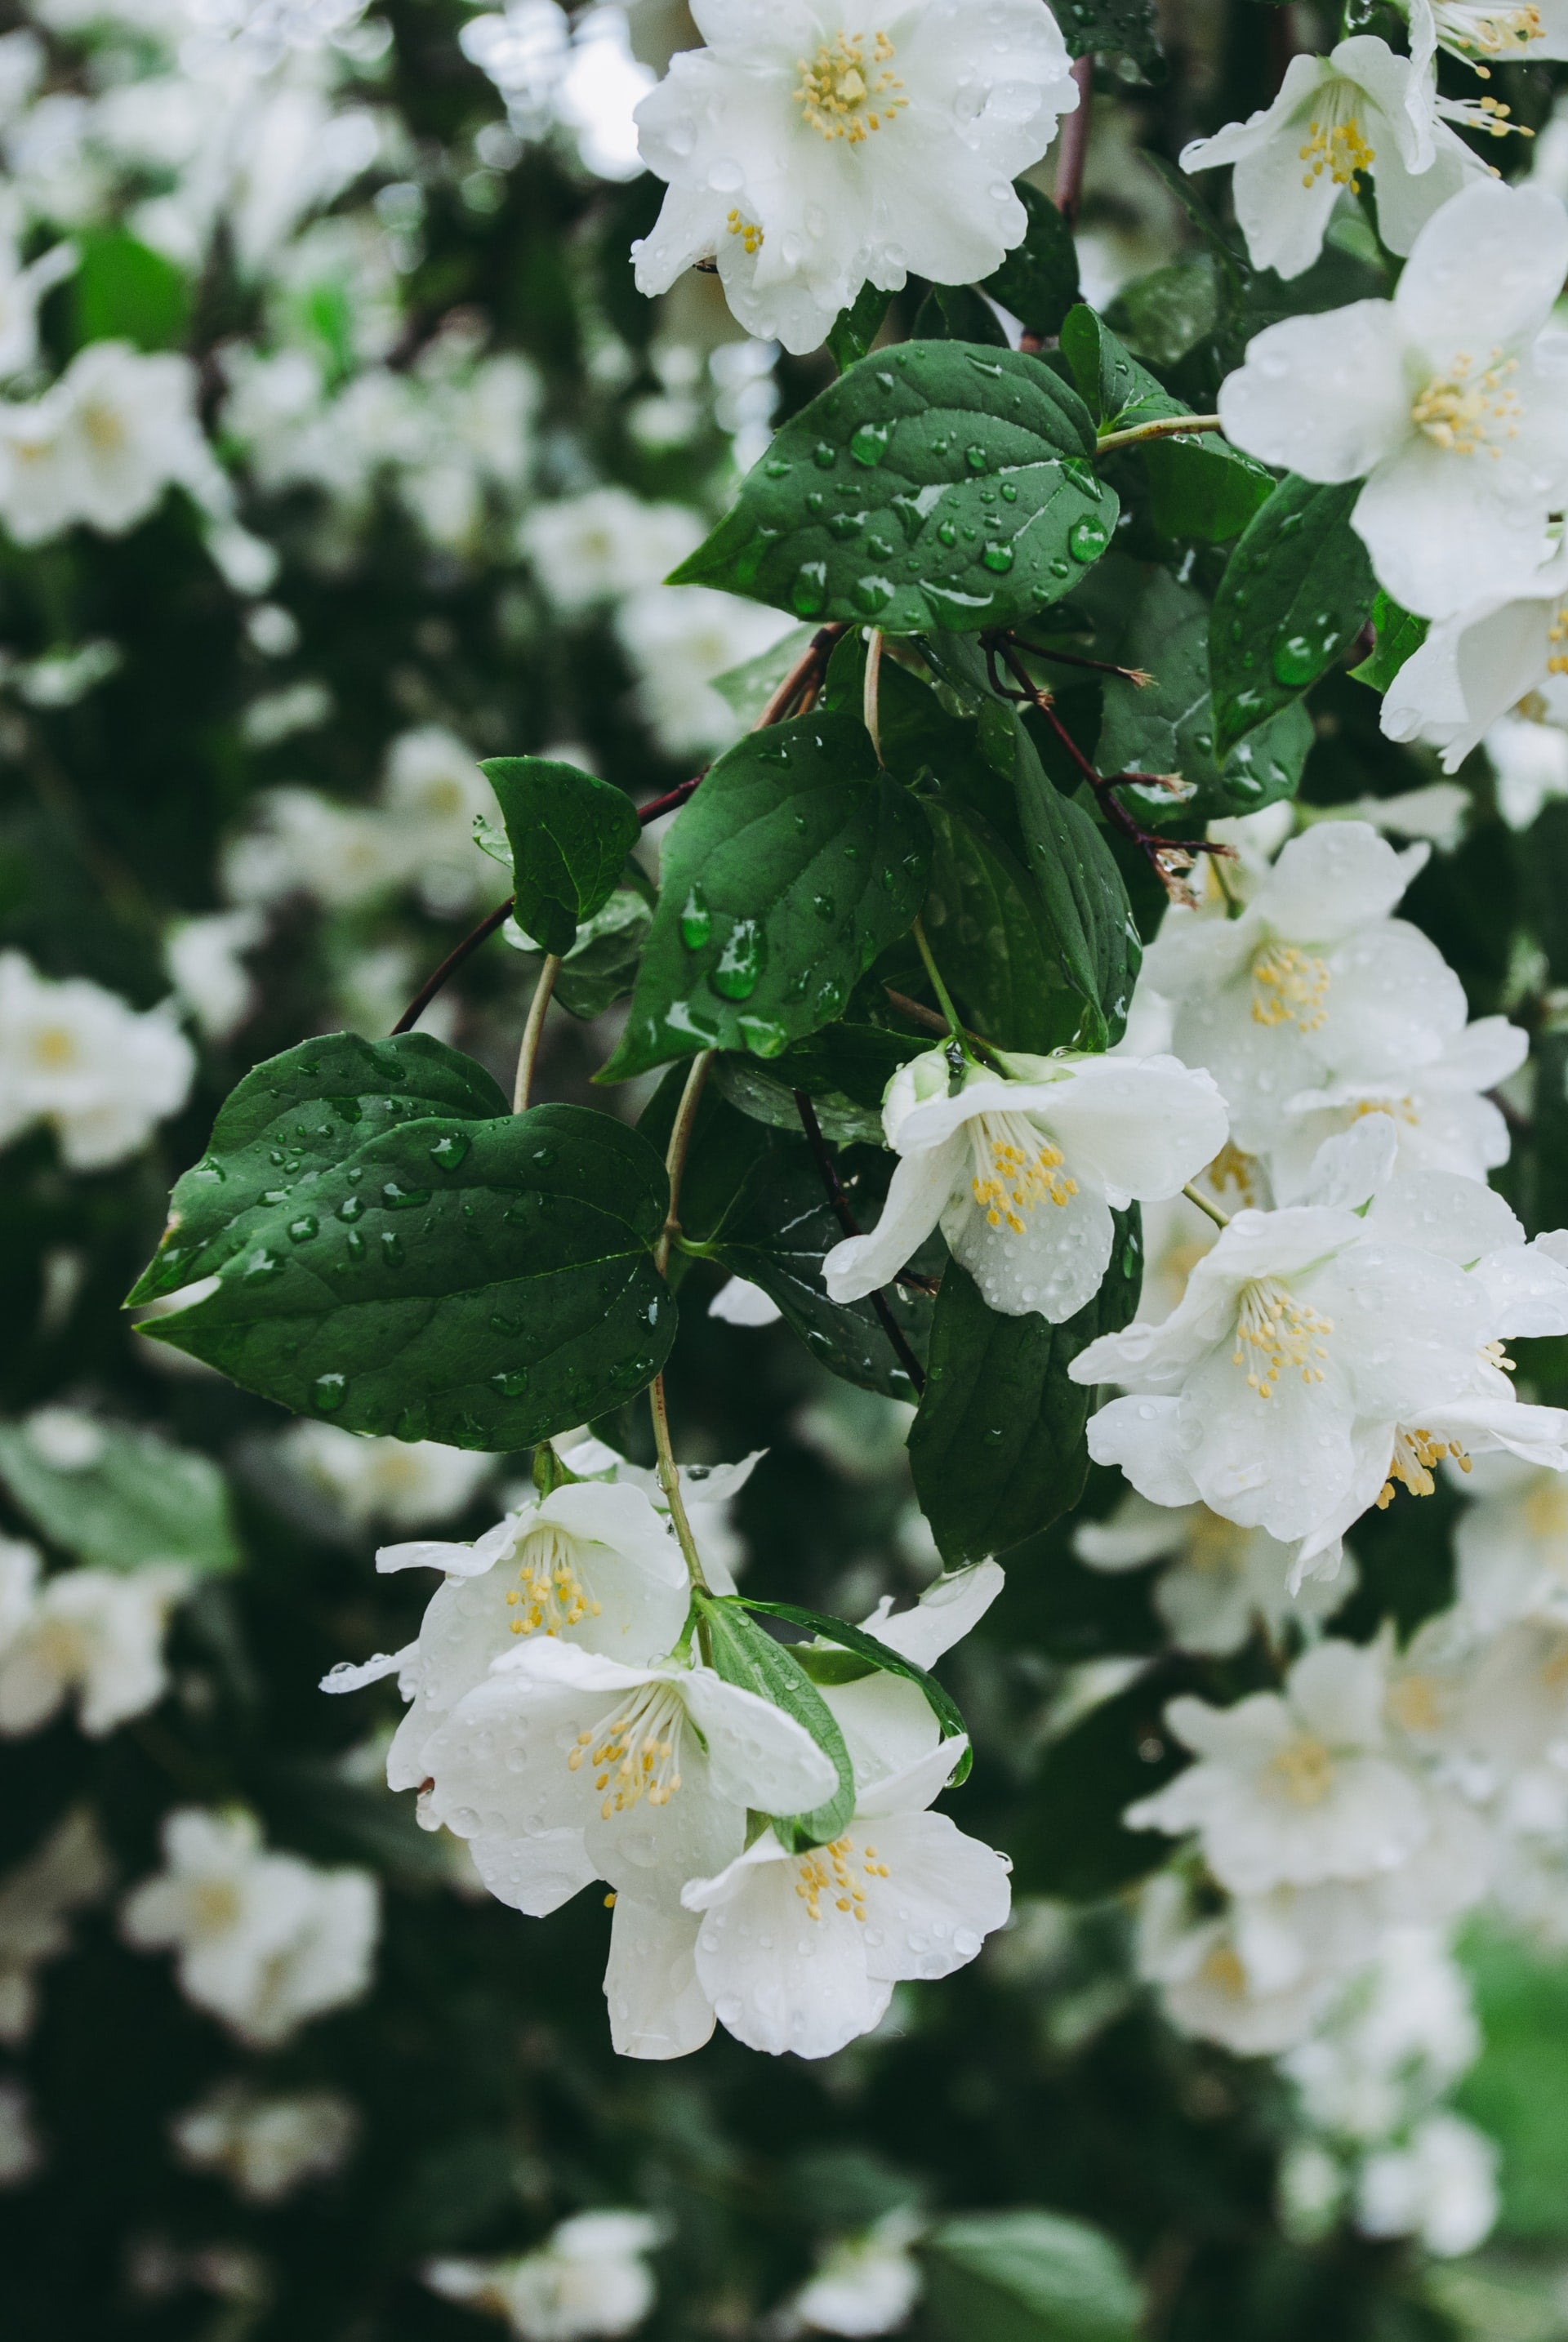 Jasmine : A Healing Herb to Soothe the Skin